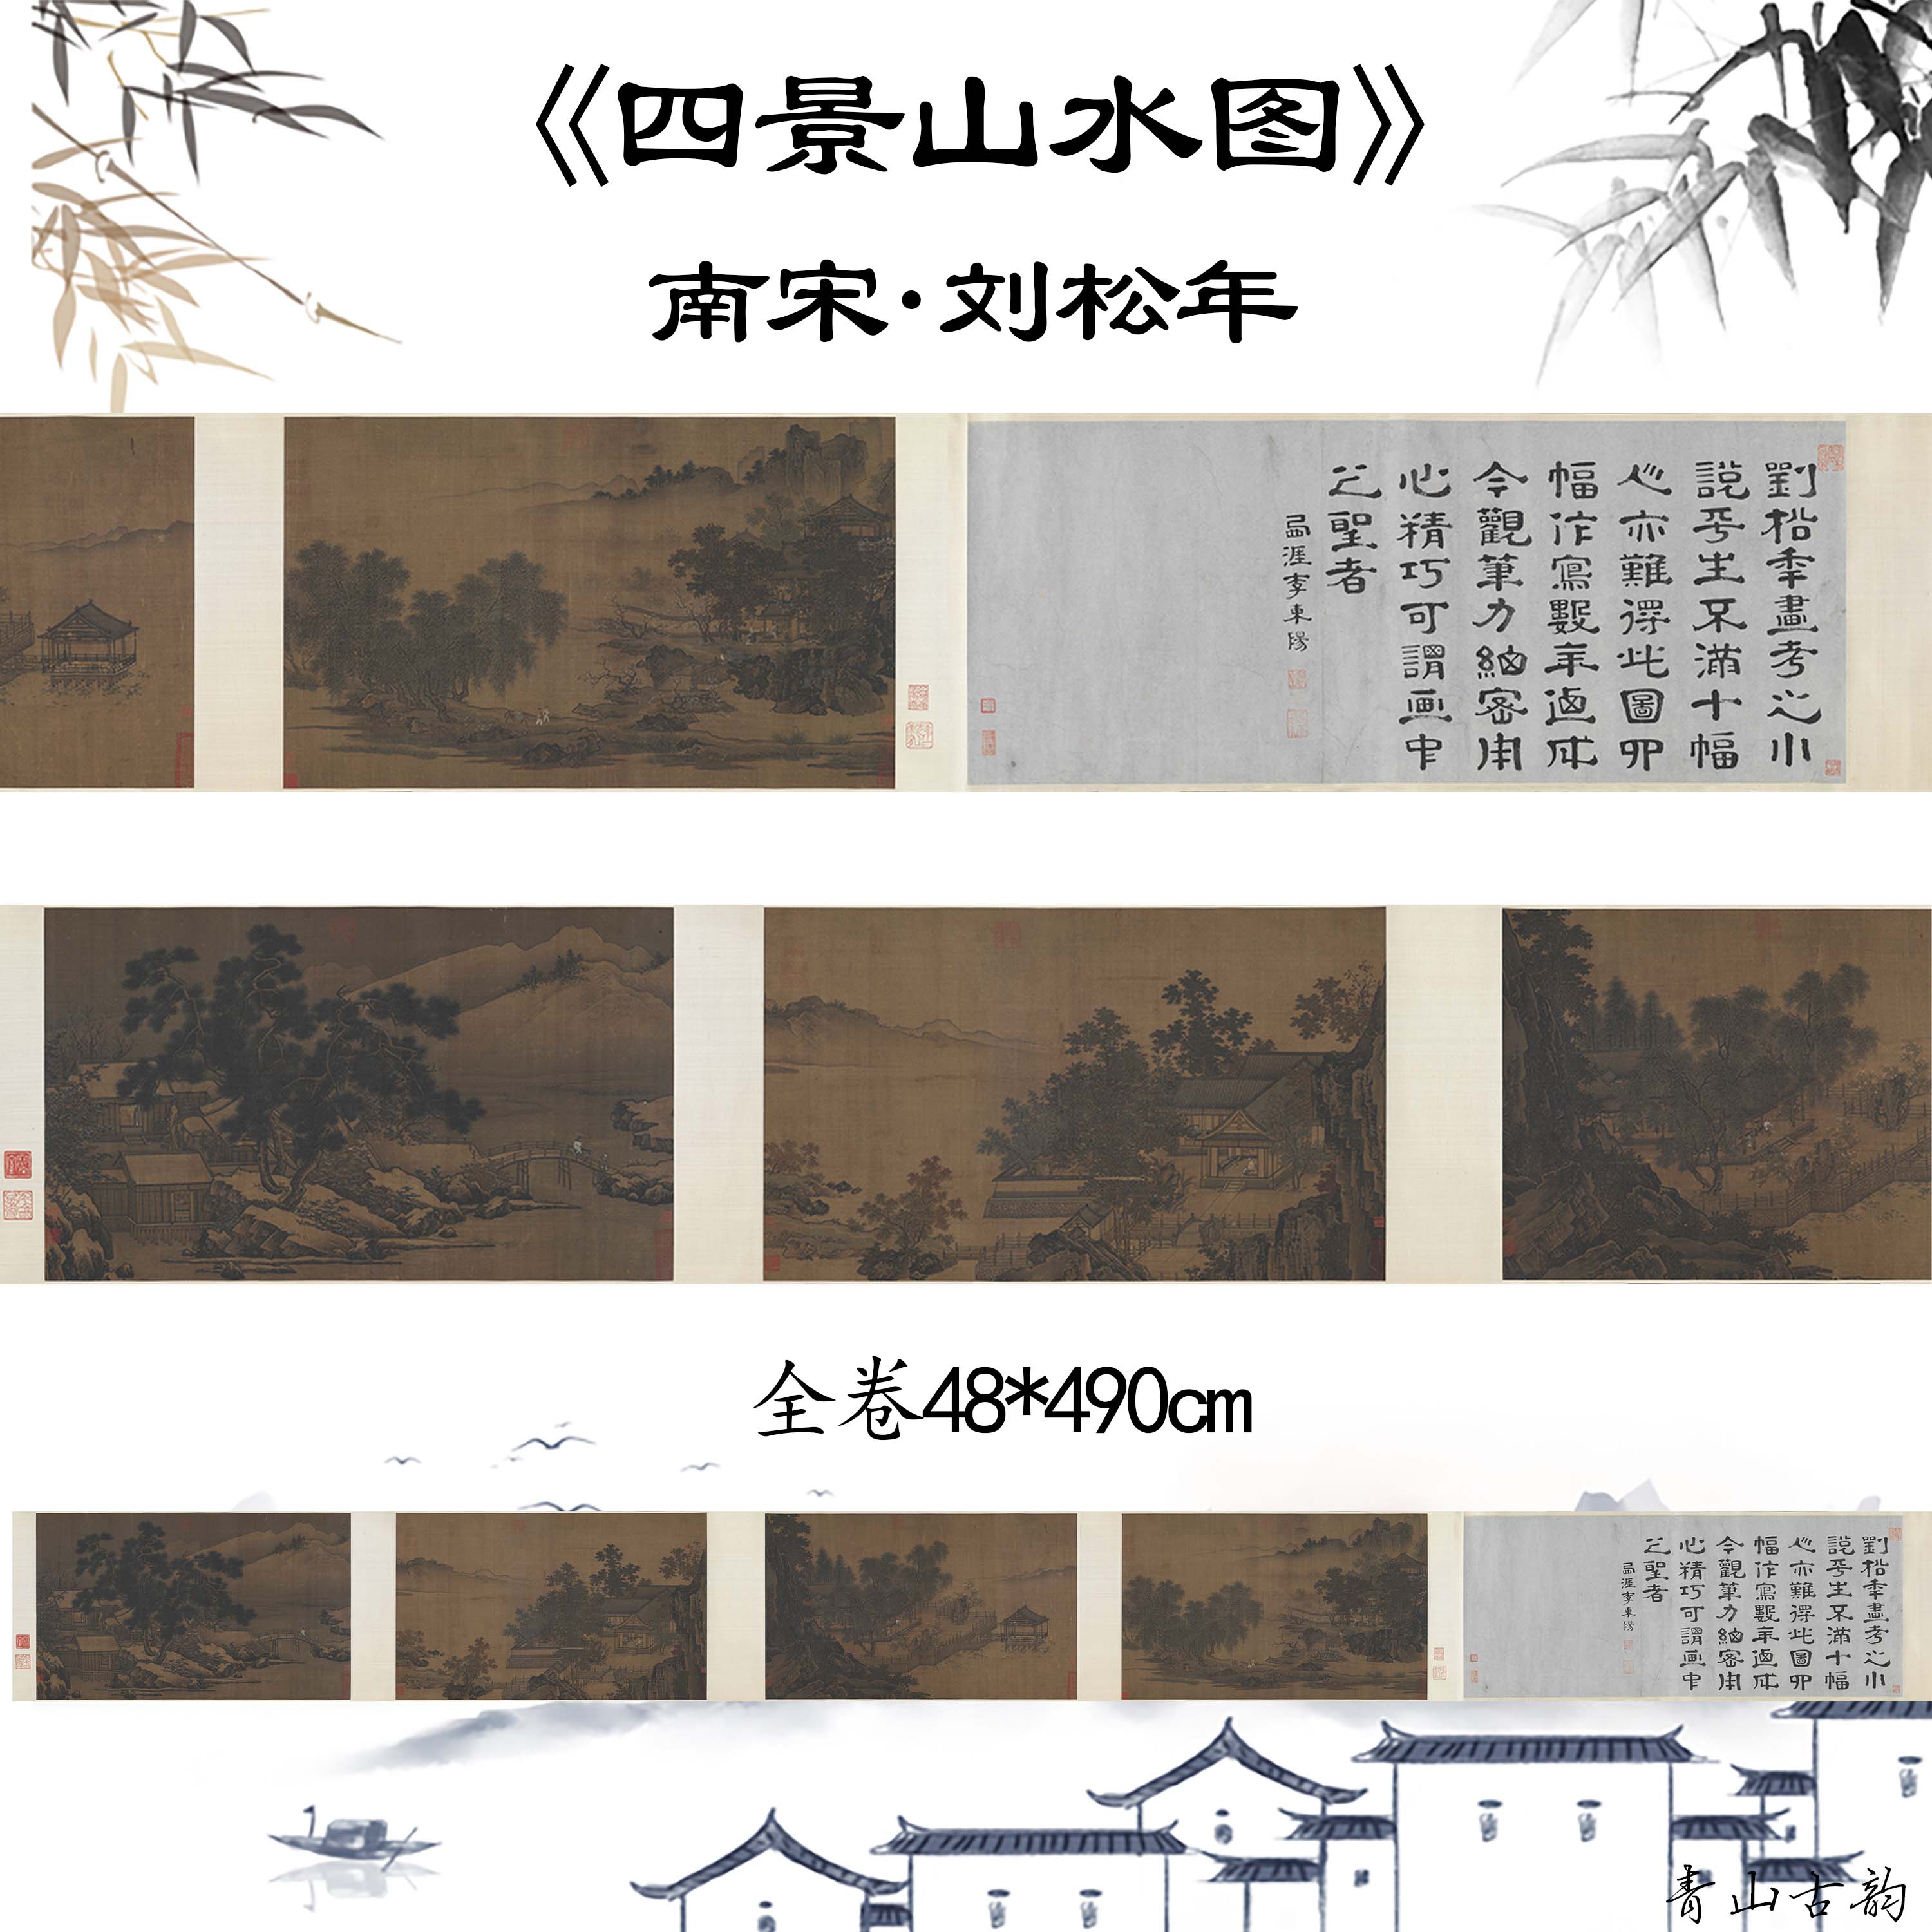 Chinese Antique Art Painting 南宋 刘松年 四景山水图 Song Liu Song Nian Si Jing Shan Shui Tu Landscape China Ancient Wall Picture Ideas 1372-Chinese Style Finds™